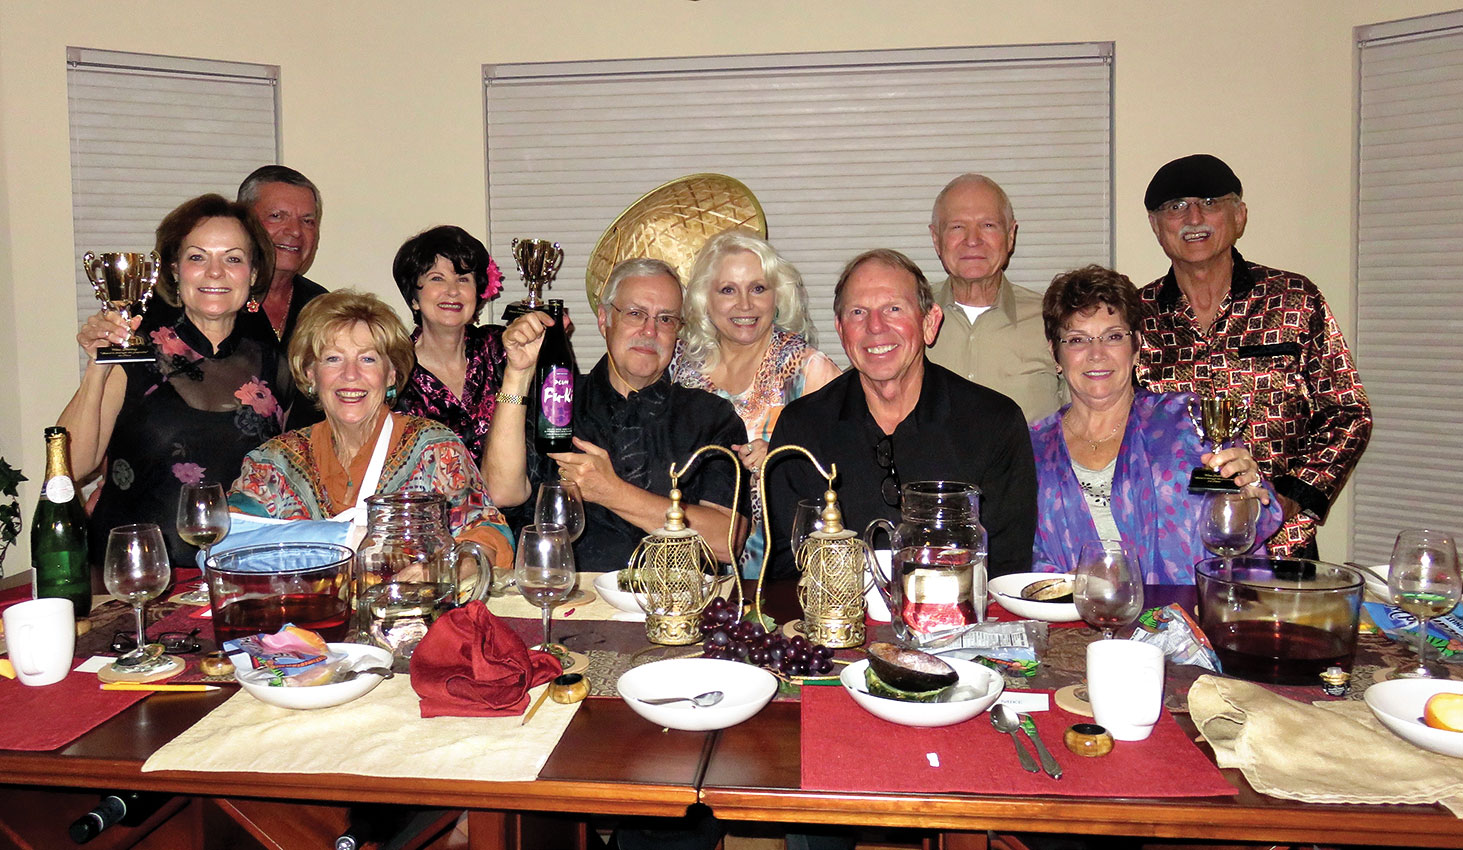 Left to right: Terry Gilberti, Mike Gilberti, Catherine Bass, Nancy Toppan, Roy Bryant, Vivian Wright, Ken Bass, Al Wright, Mary Bryant and Pete Toppan